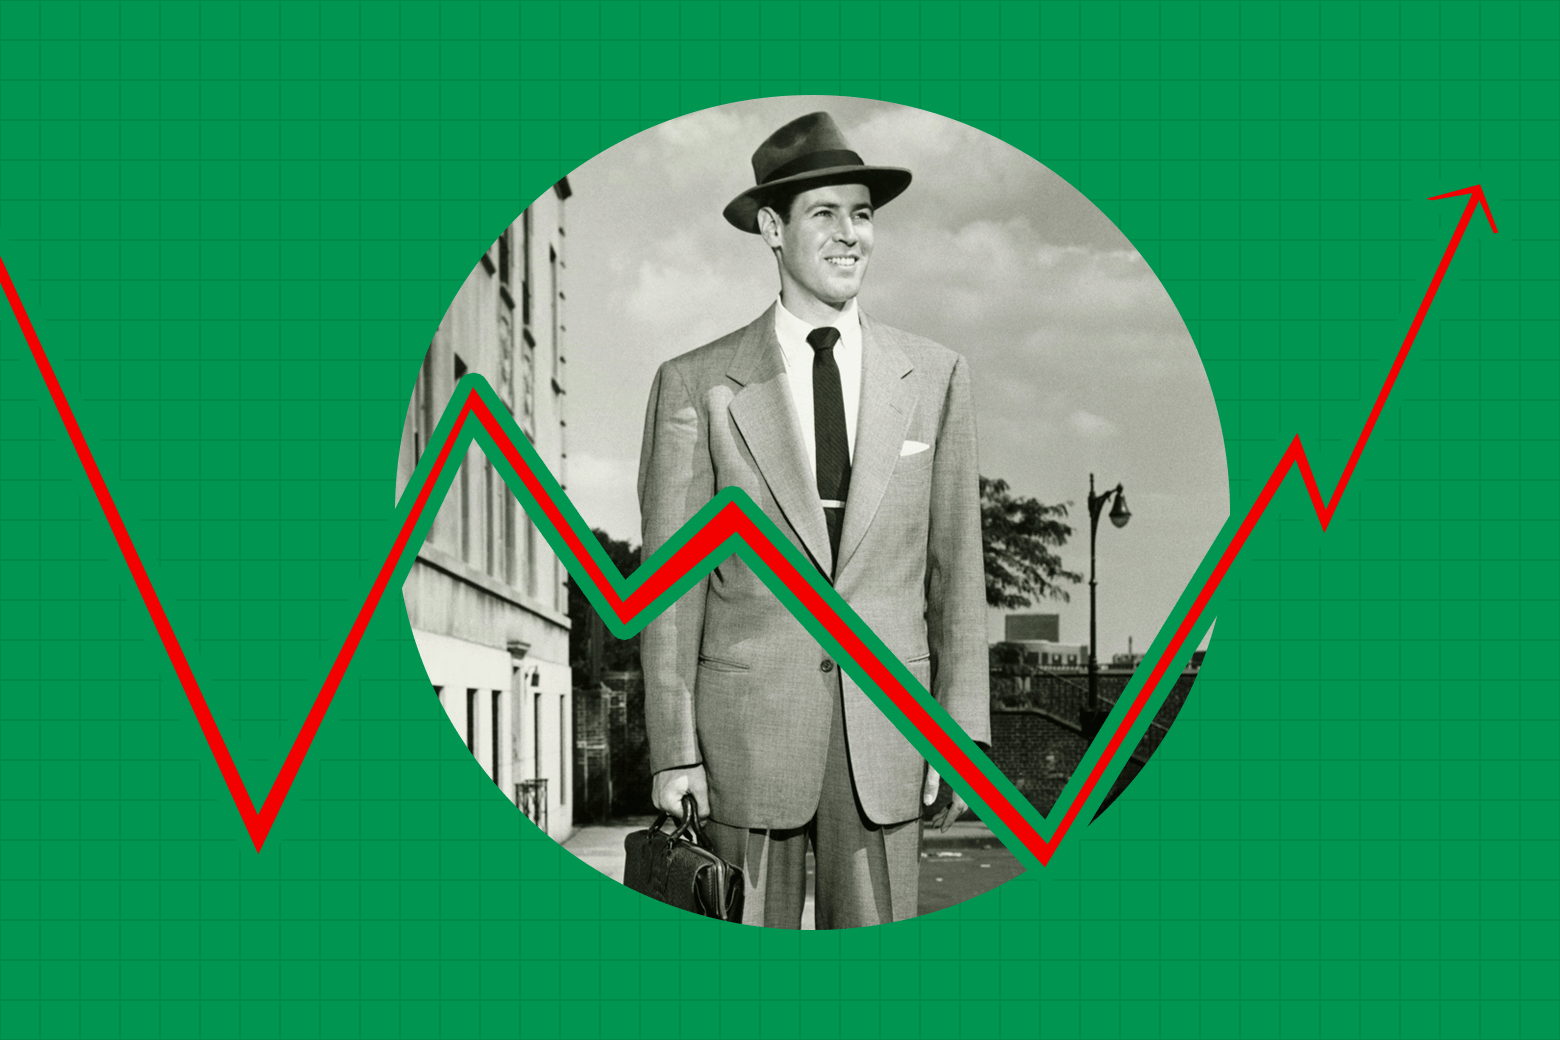 A midcentury businessman in a suit and fedora, holding a briefcase and smiling. A stock chart–like graph is seen imposed over his photo.